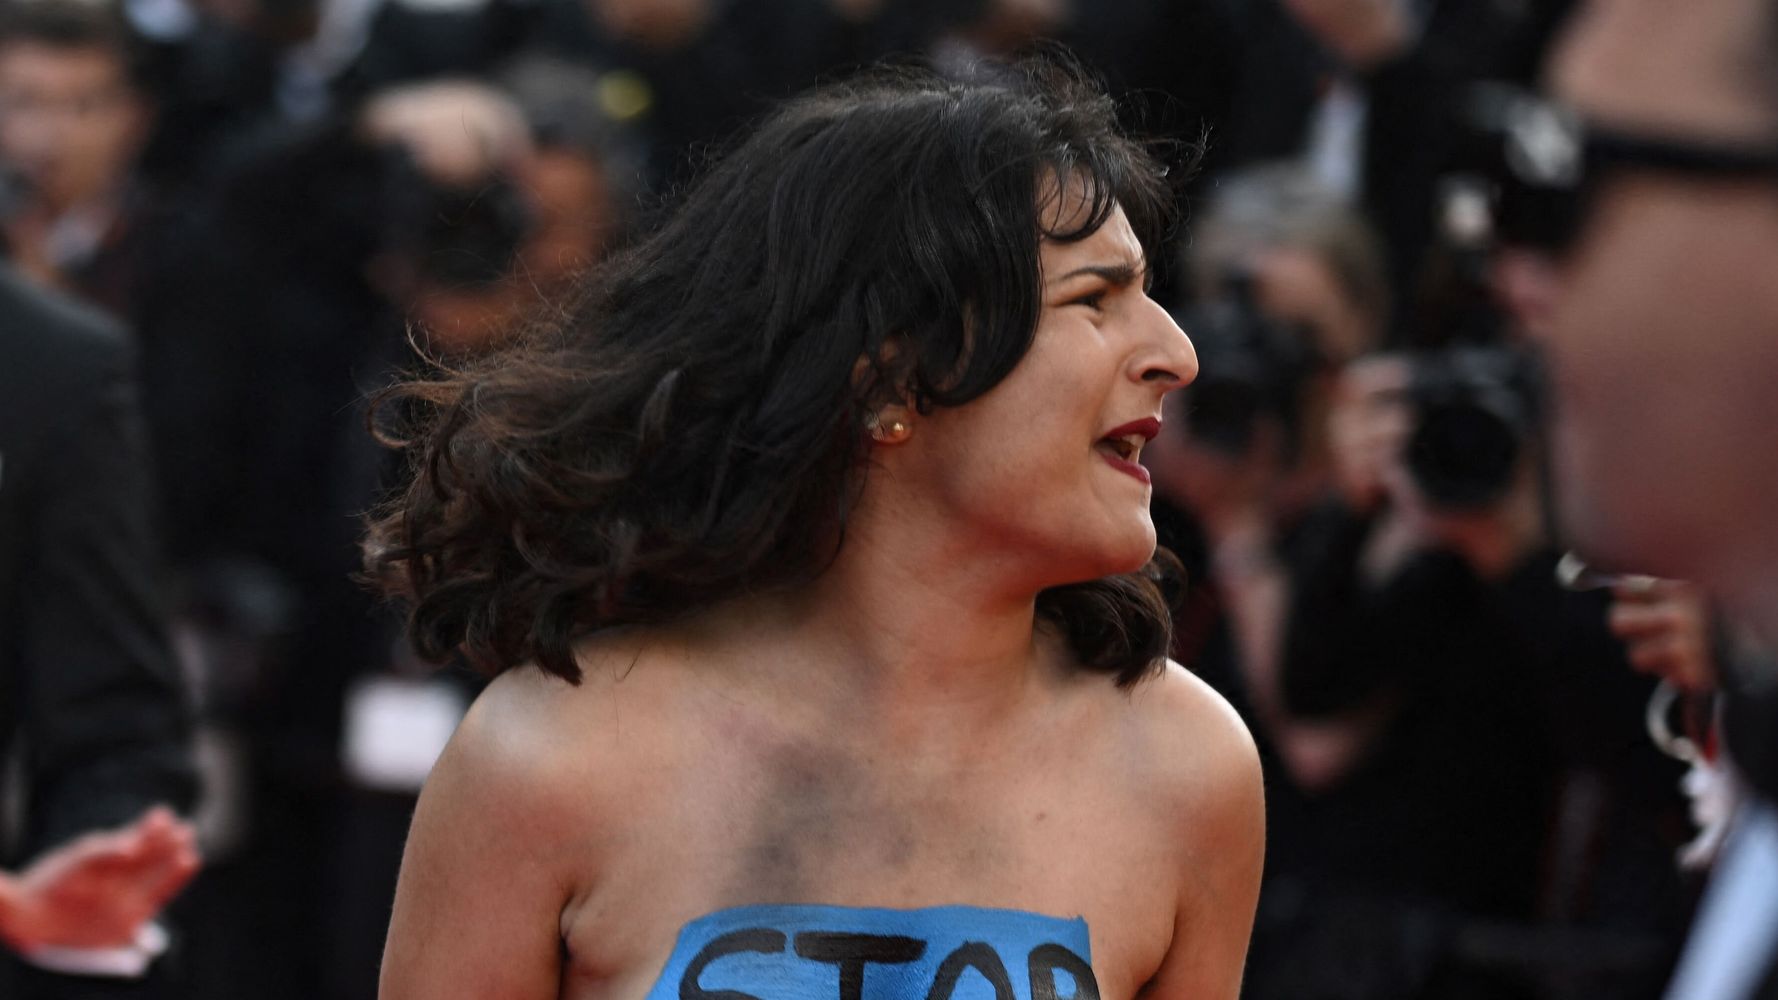 Woman Strips On Cannes Red Carpet To Protest Russian Rapes In Ukraine